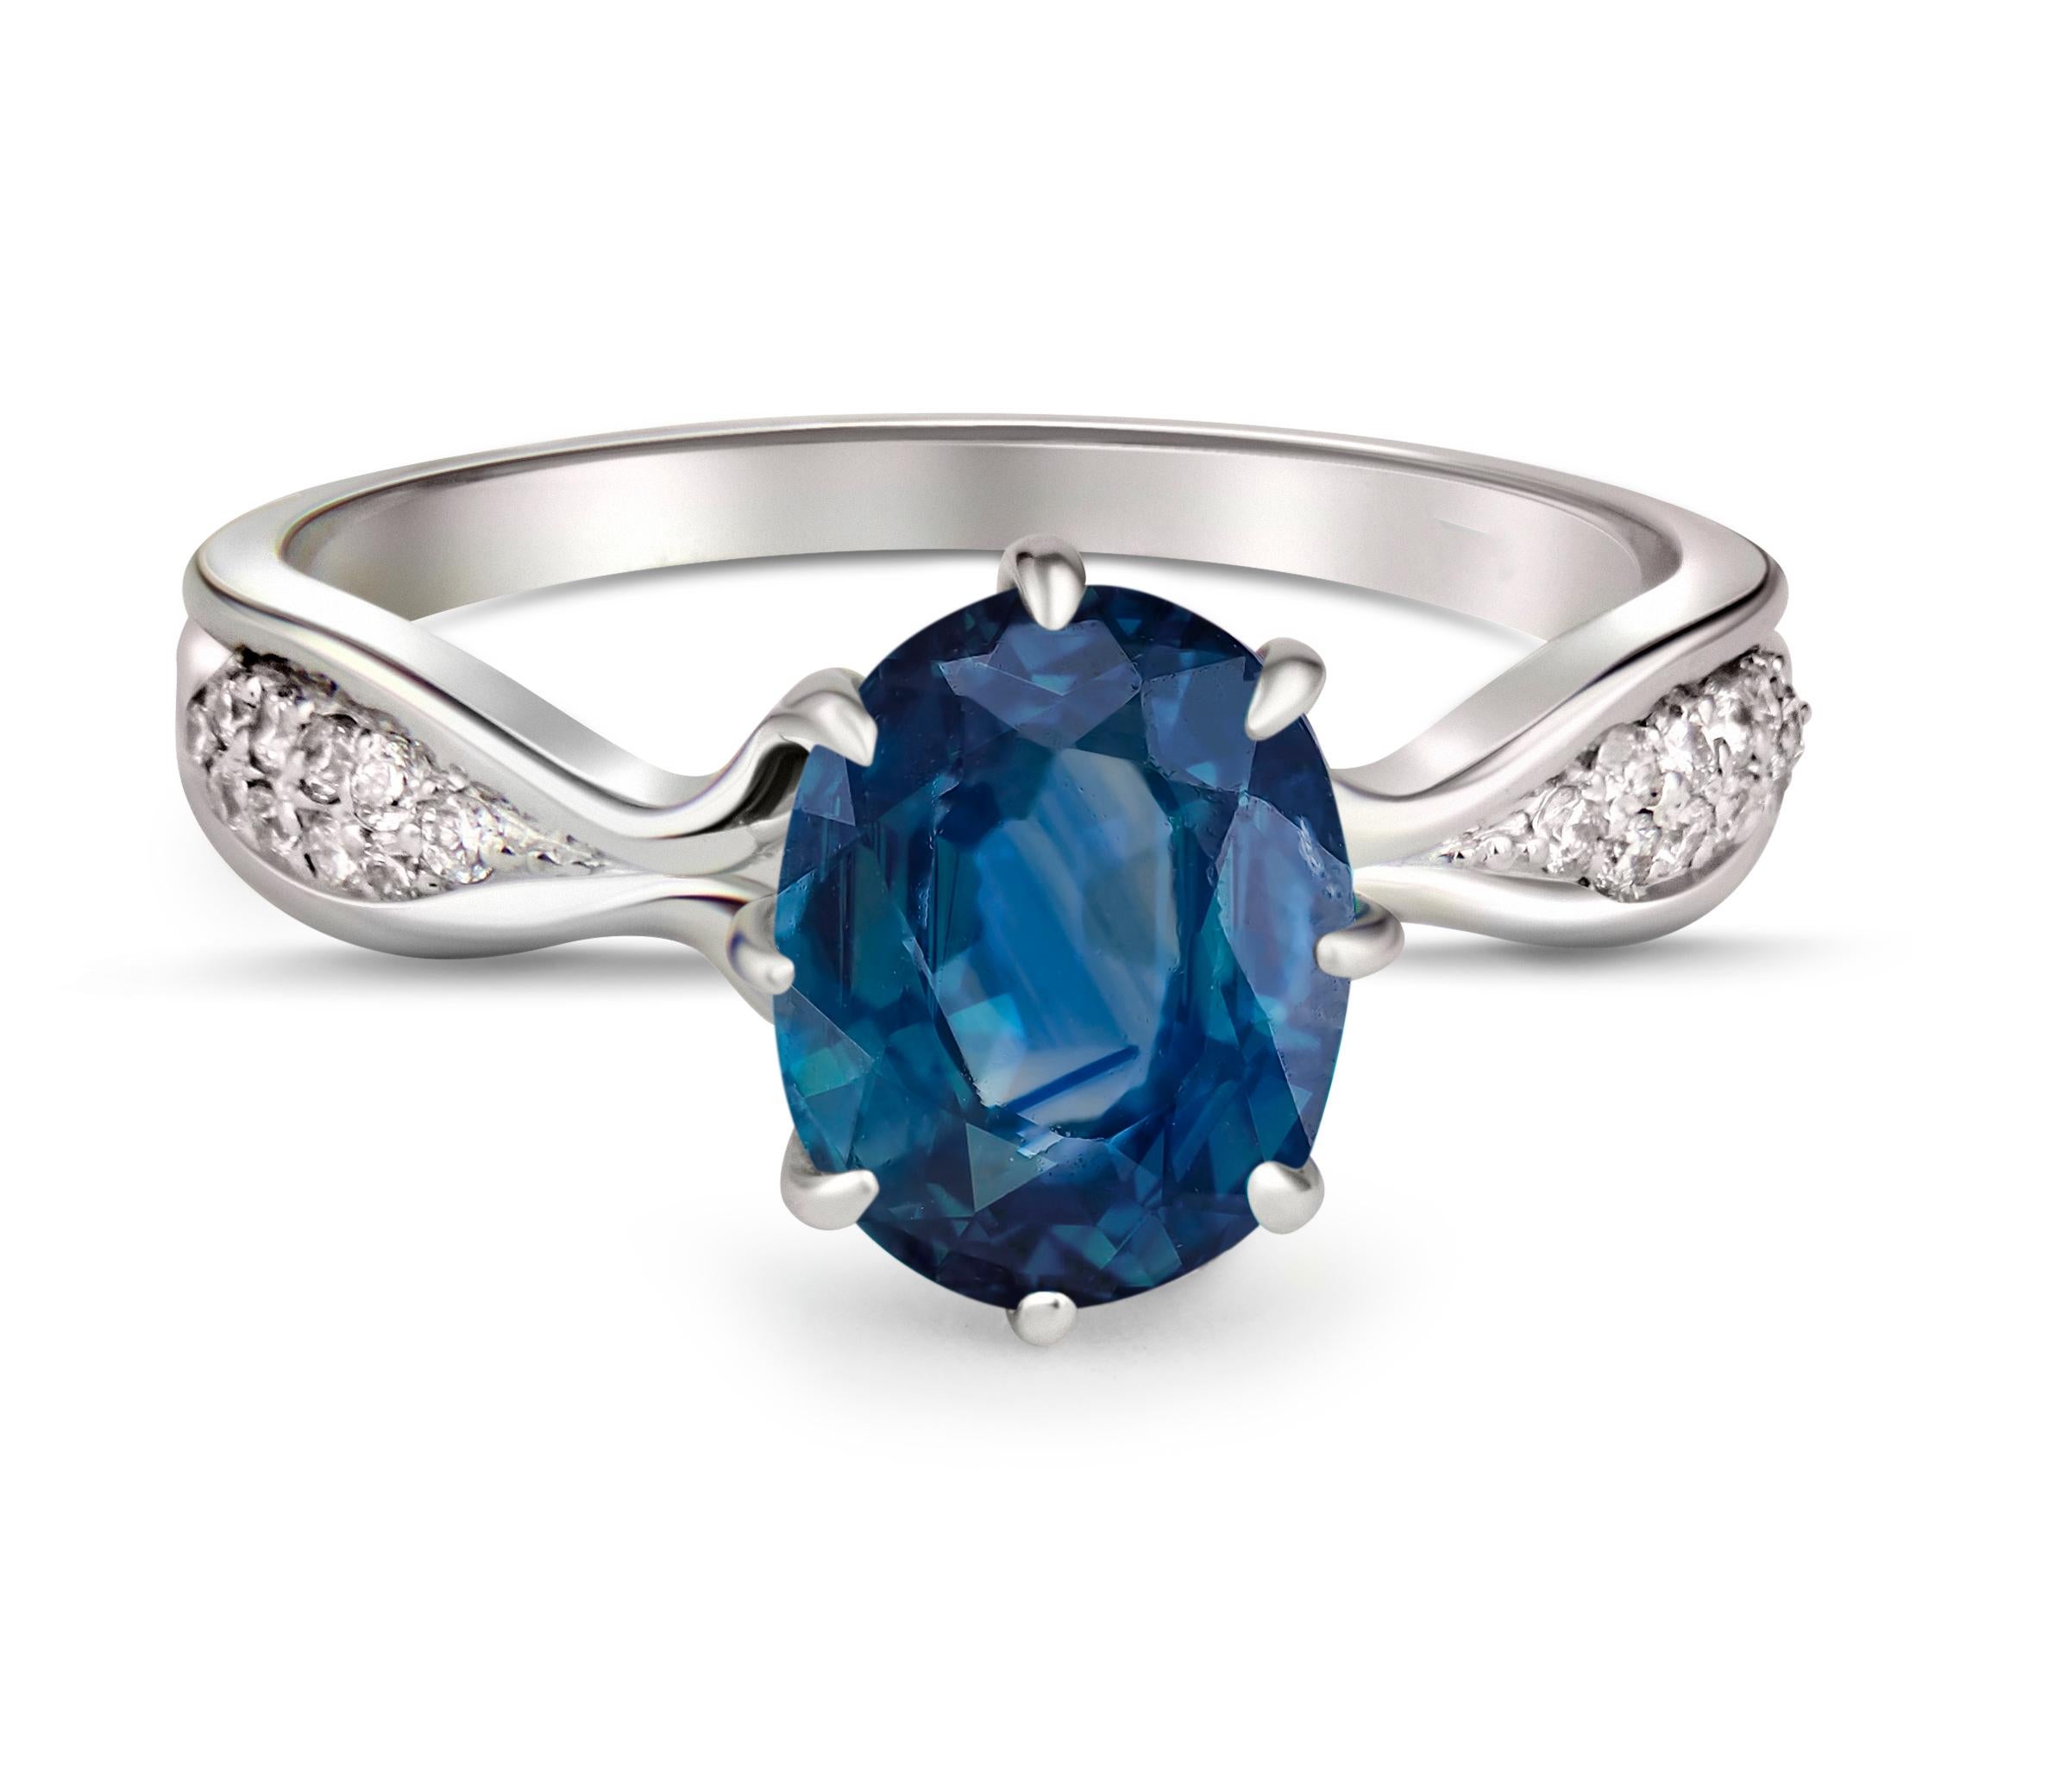 Sapphire 14k gold ring. 
Oval Sapphire ring. Sapphire gold ring. Sapphire vintage ring. December birthstone ring. Blue gem ring.
 
Metal: 14k solid gold
Weight: 2.1 g (depends from size).

Main stone - Sapphire, blue color, oval cut, 0.8 ct weight,